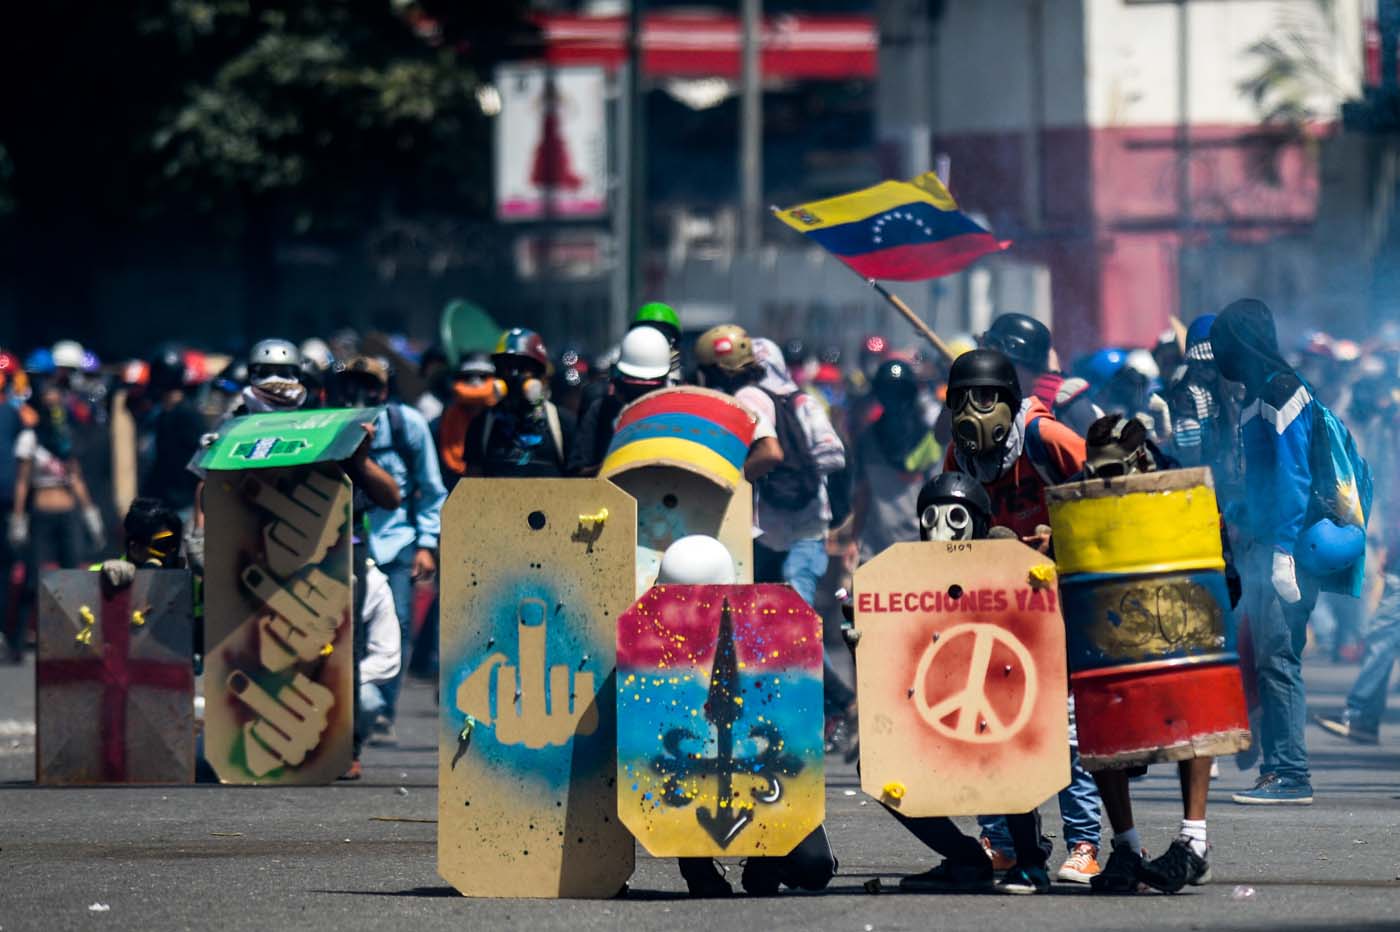 Opposition activists clash with the riot police during a demonstration against Venezuelan President Nicolas Maduro in Caracas, on May 26, 2017. Riot police in Venezuela fired tear gas and water cannon to stop anti-government protesters from marching on a key military installation Friday during the latest violence in nearly two months of unrest. / AFP PHOTO / Federico PARRA